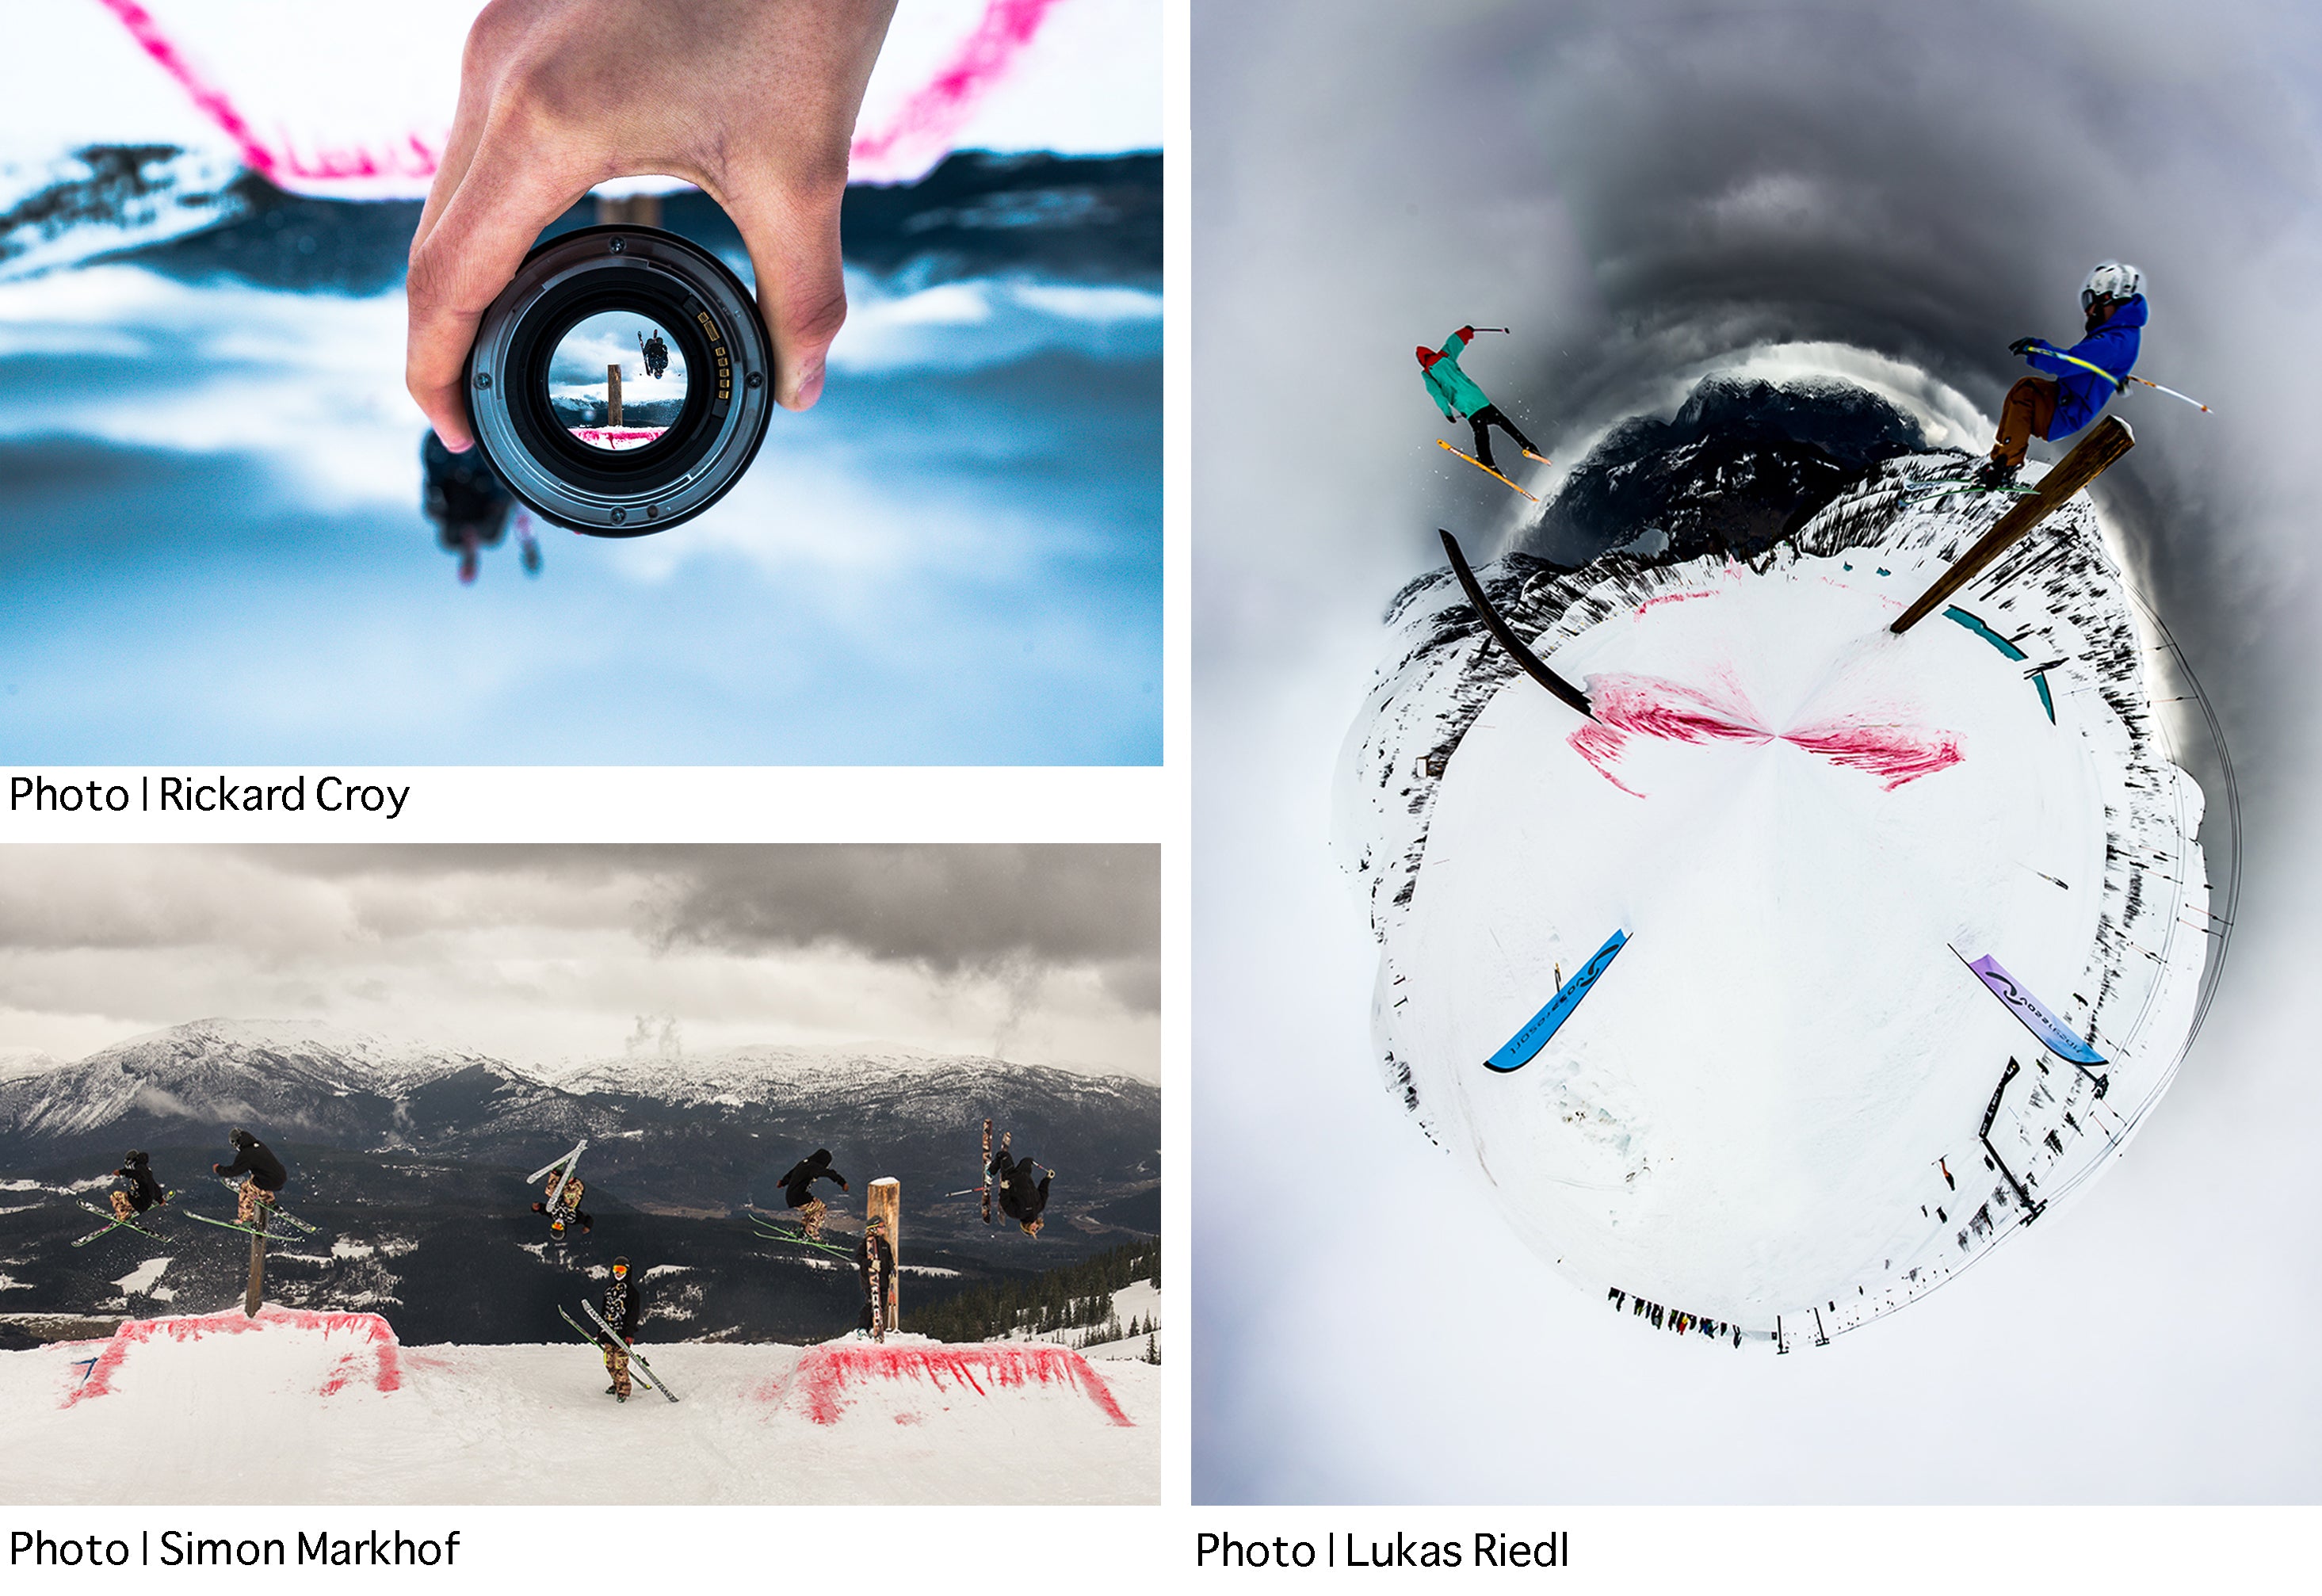 creative perspectives on skiers